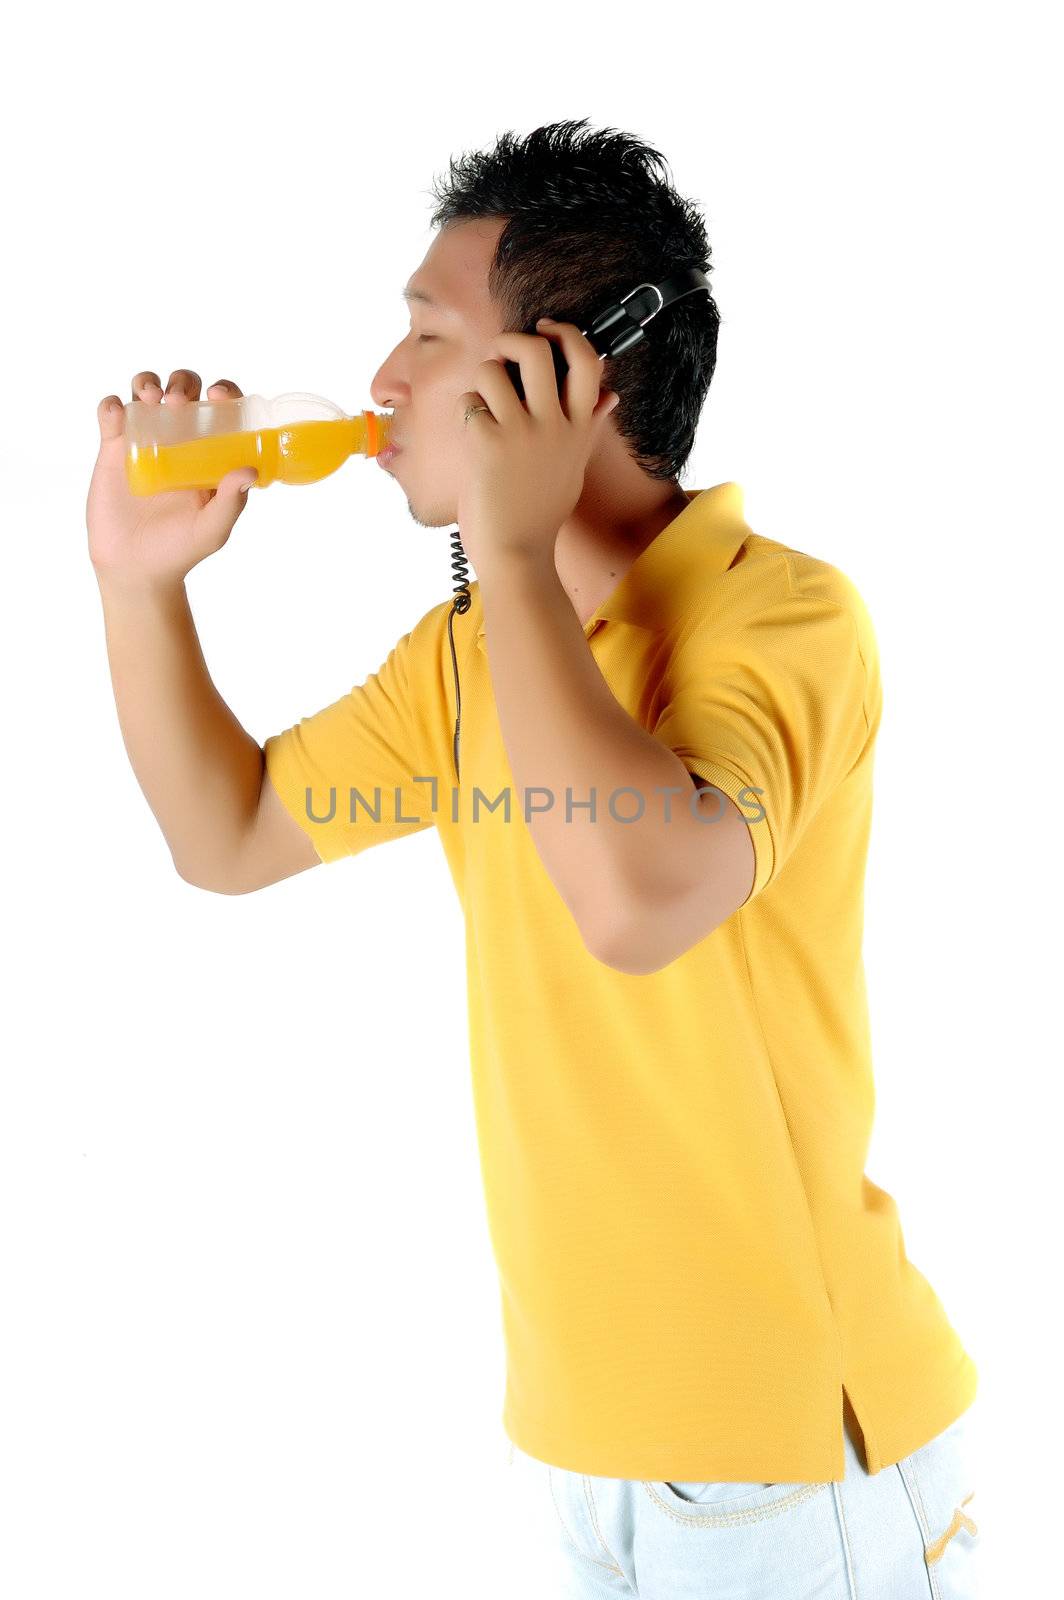 a young man was drinking a bottle of orange juice isolated on white background